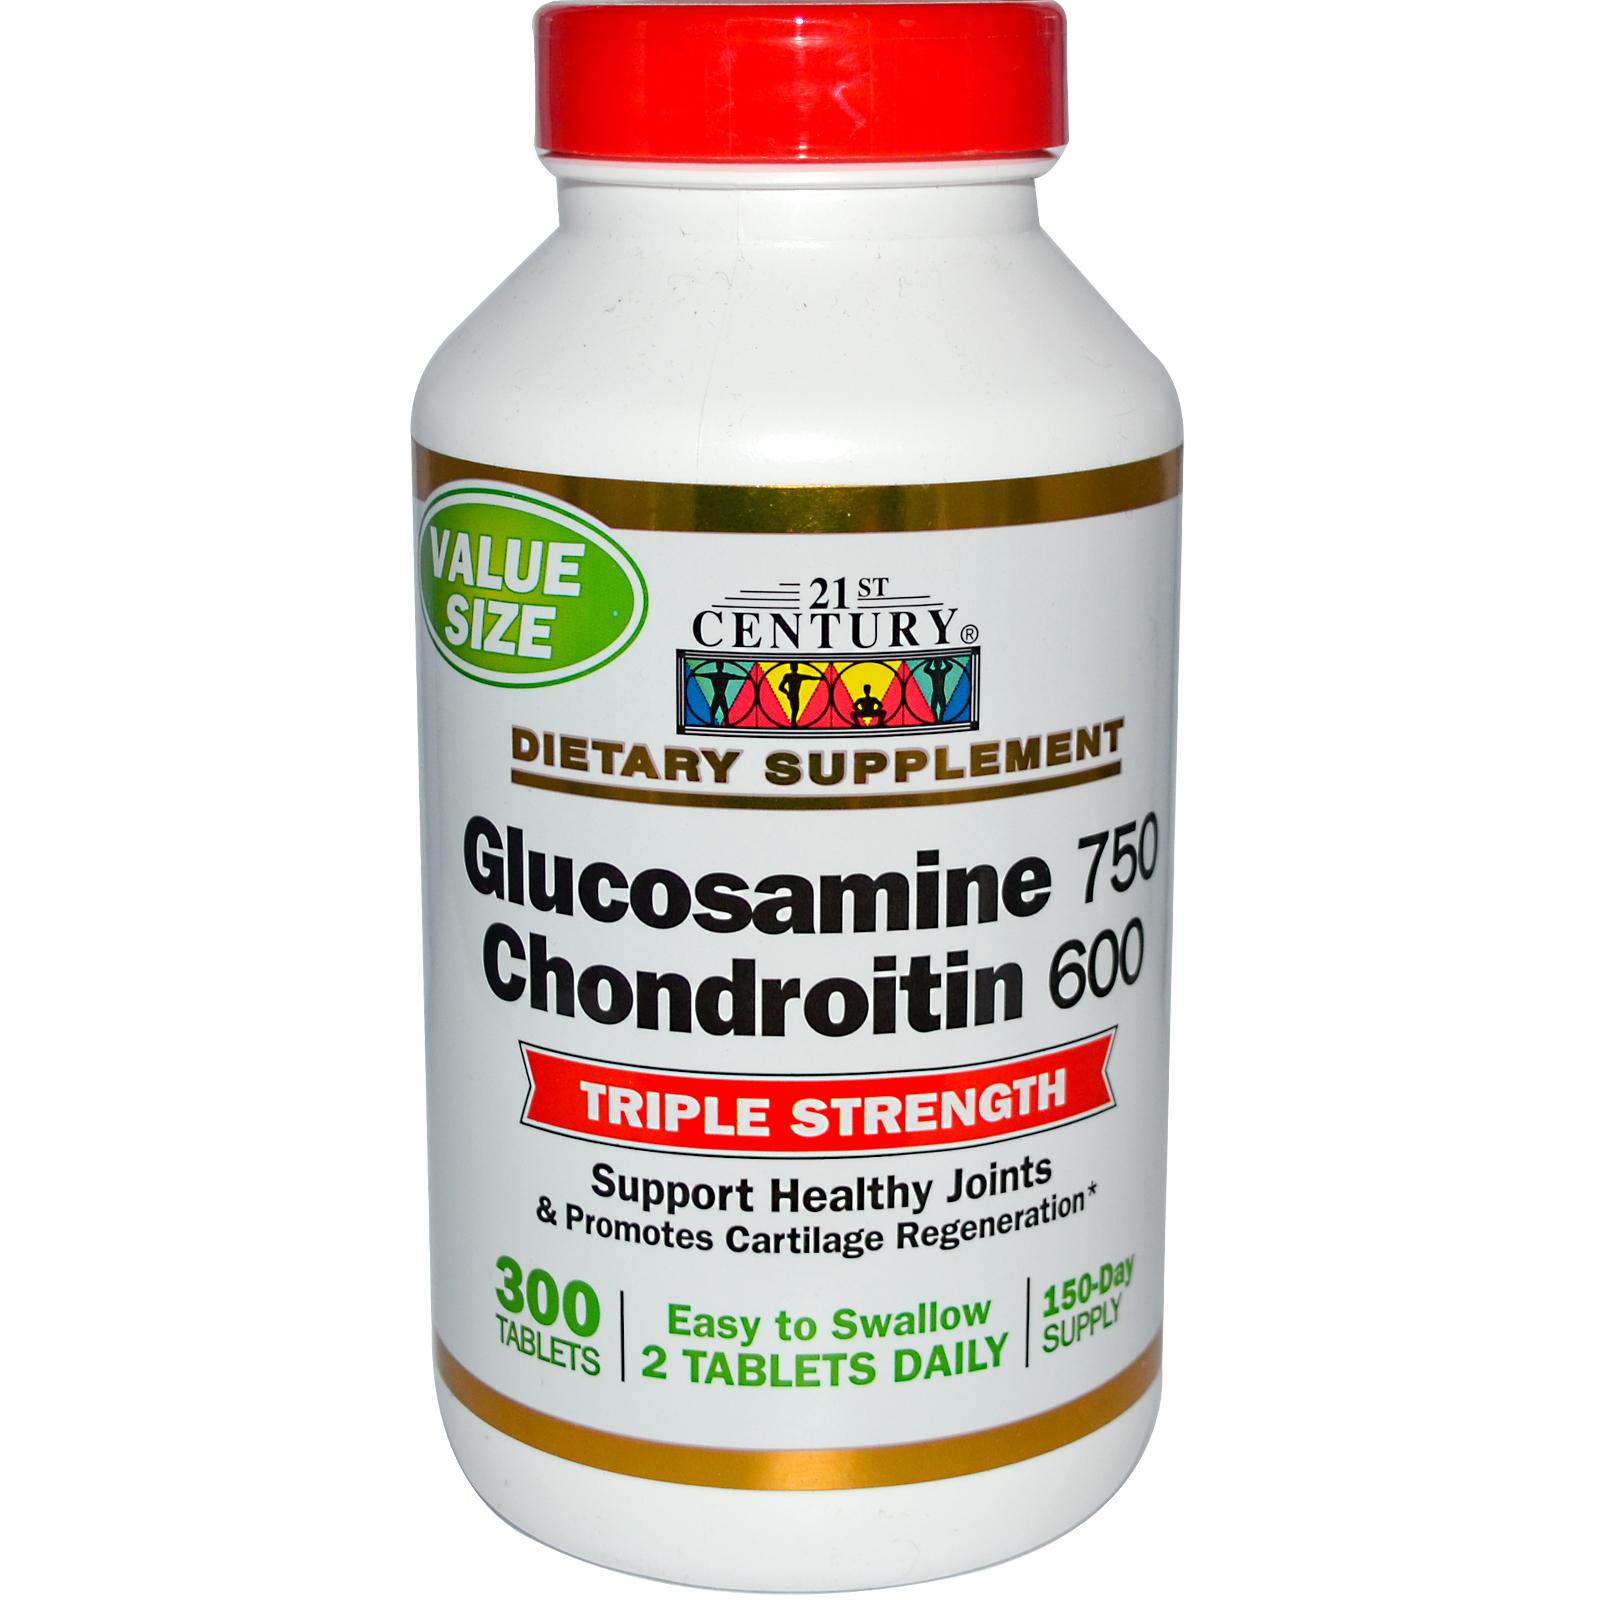 Glucosamine/Chondroitin Triple Strength Faces Consumer Fraud Class Action Lawsuit